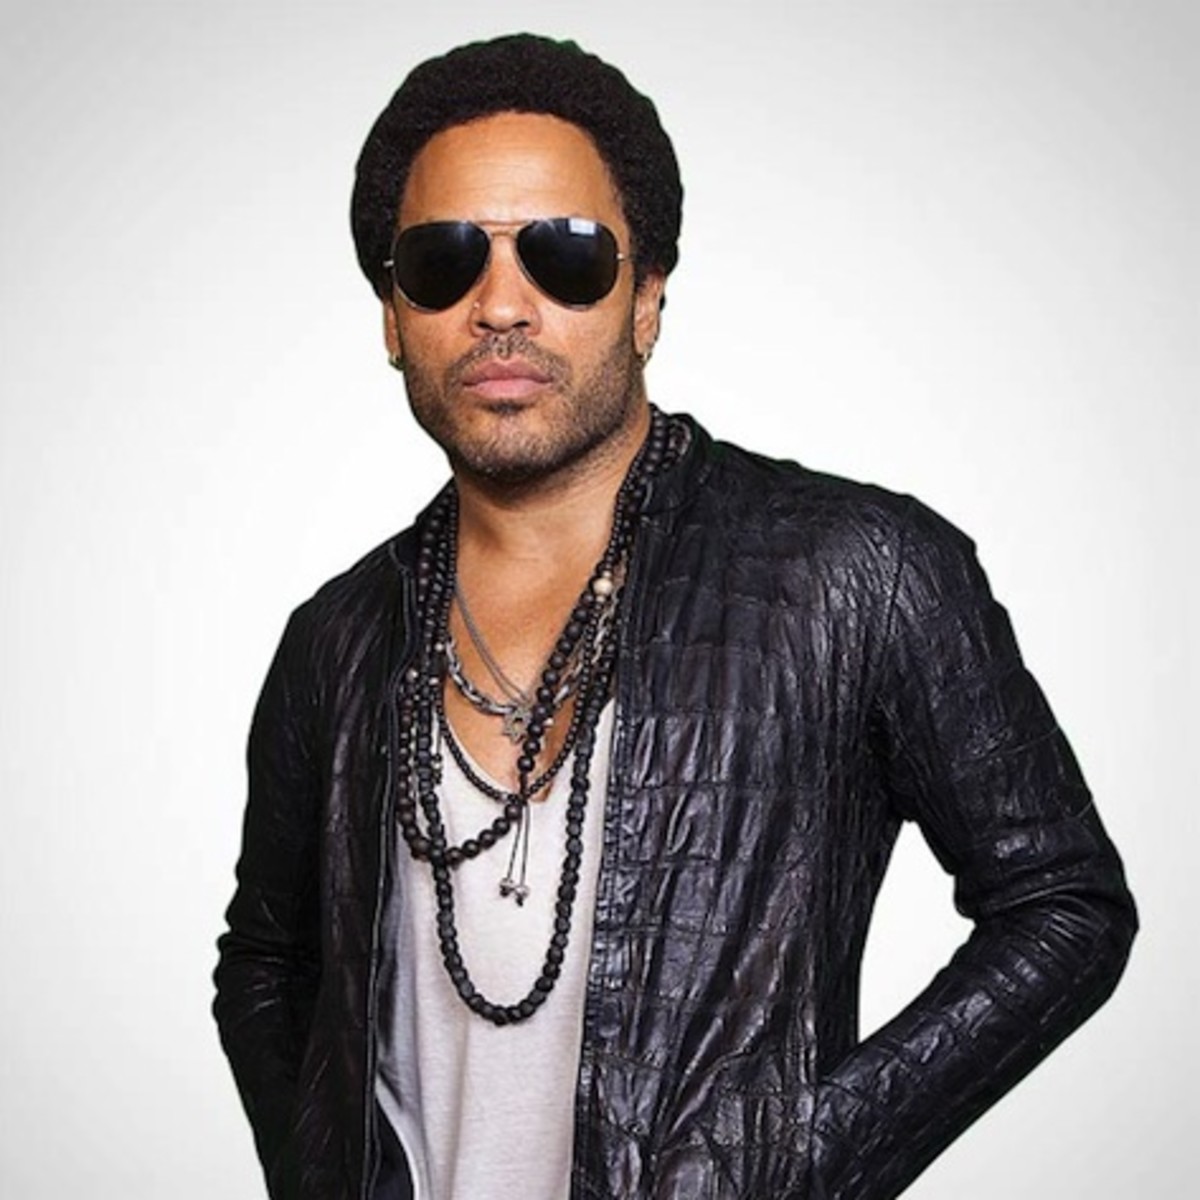 Lenny Kravitz - 50 years old on May 26th, 2014